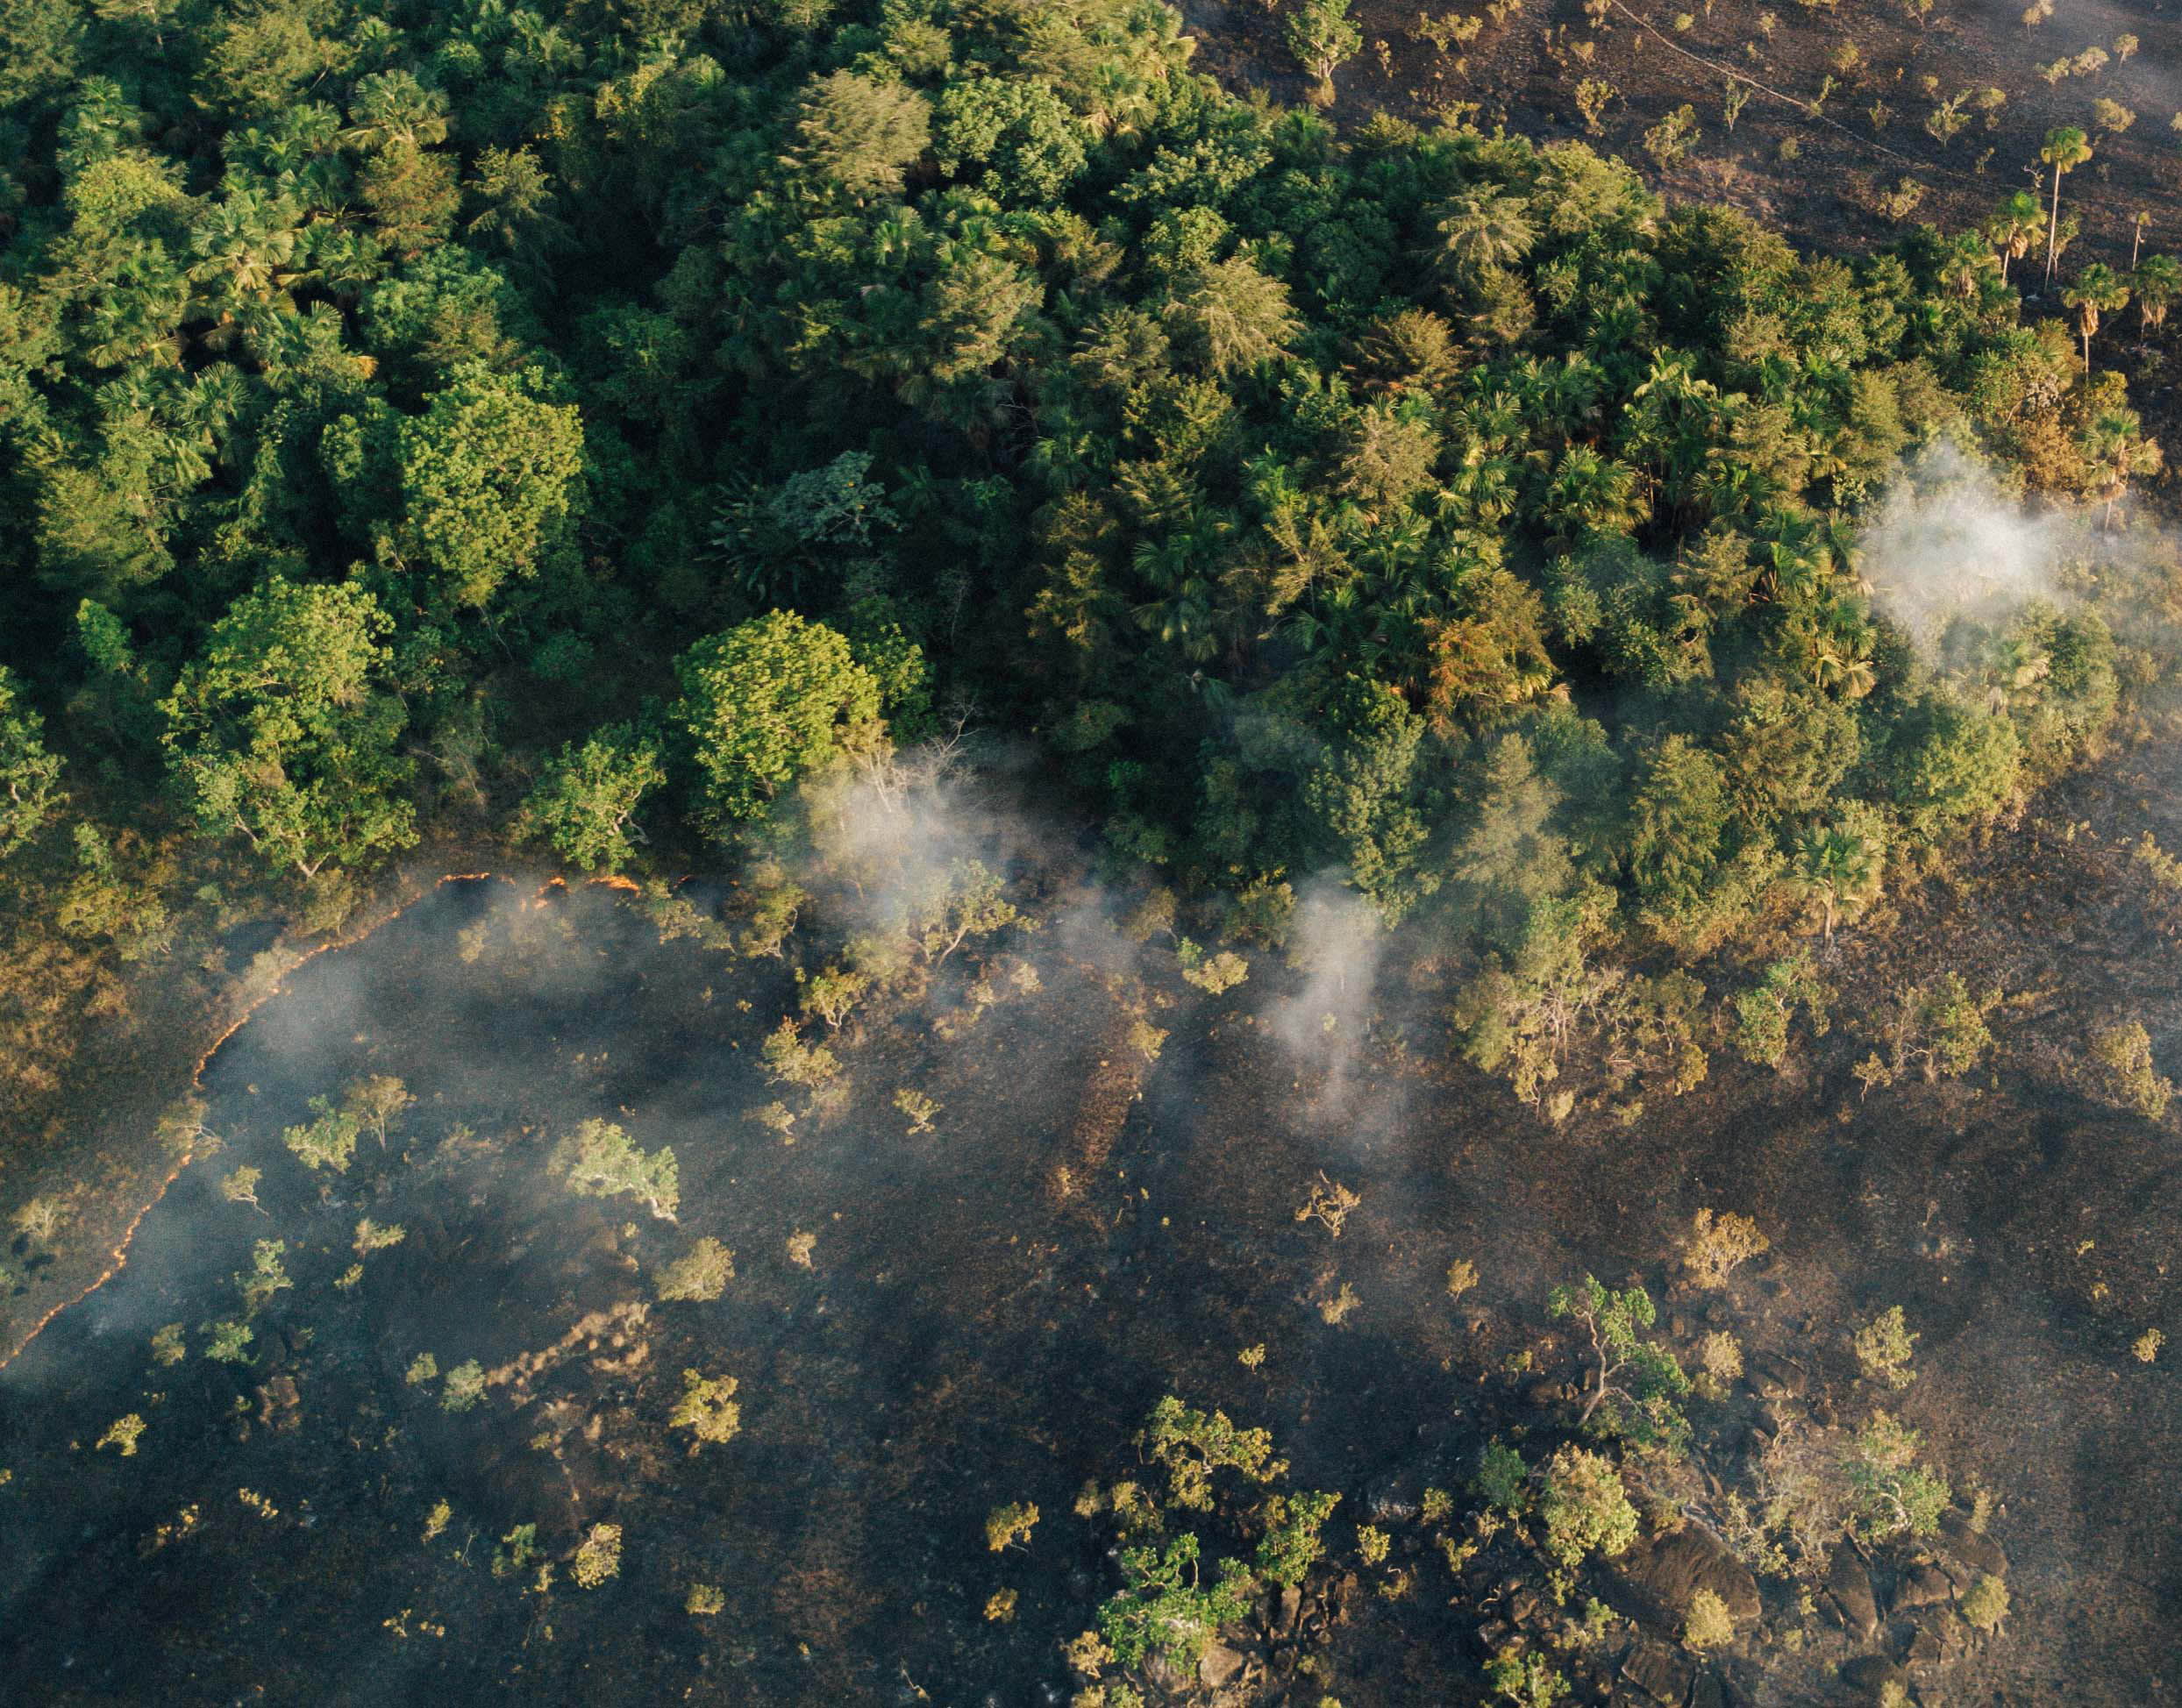 The Amazon Is Still Burning. Here's How To Help.